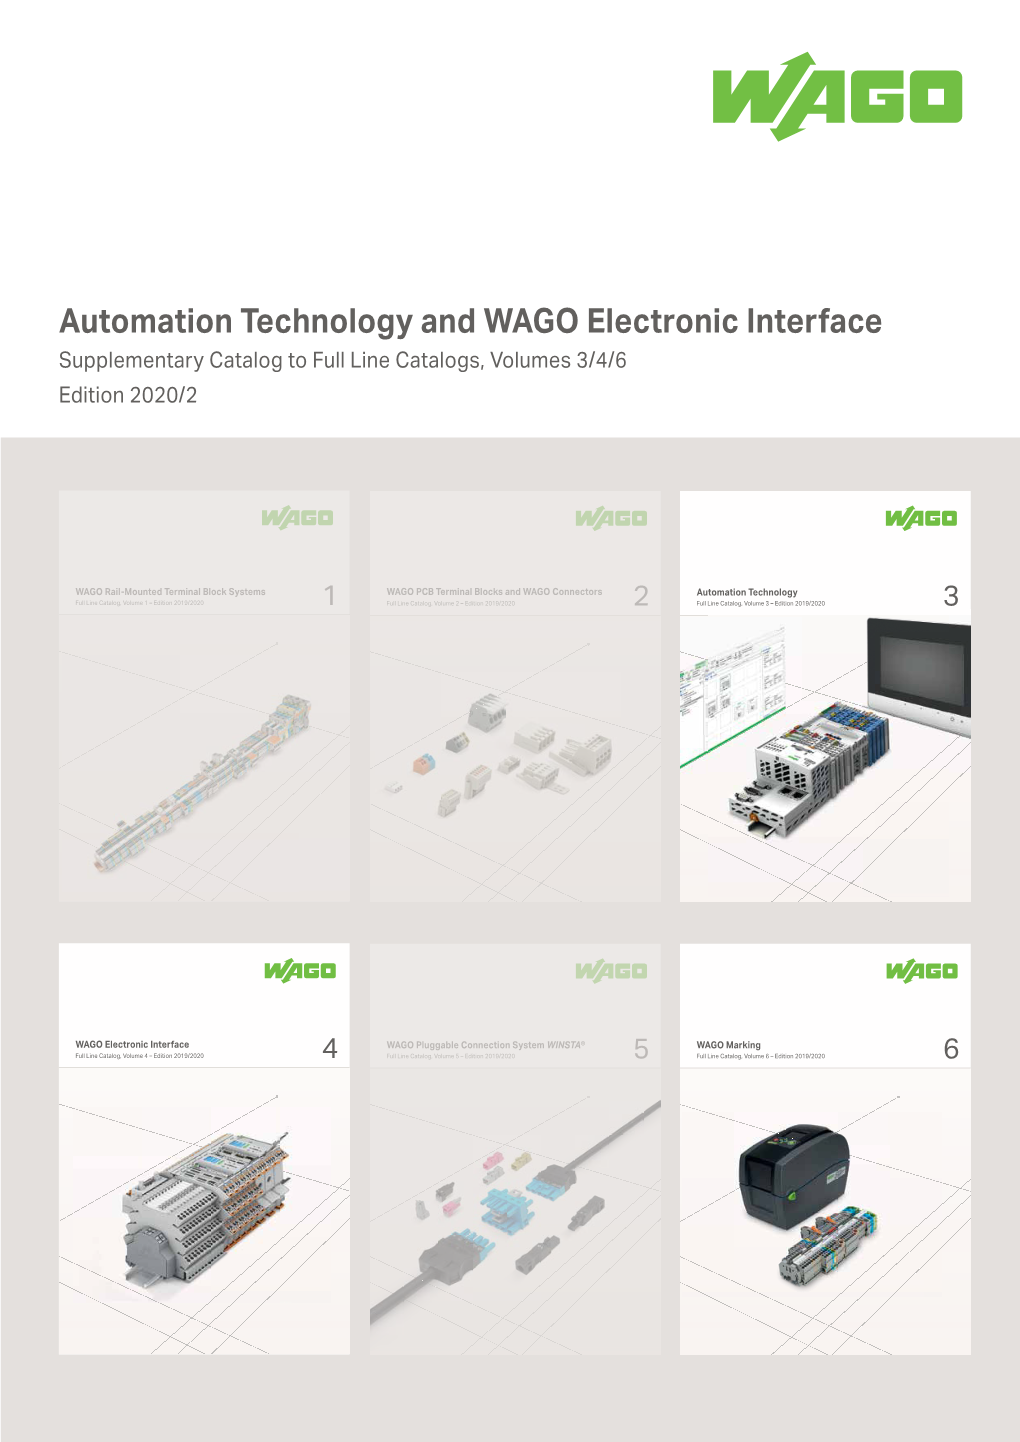 Automation Technology and WAGO Electronic Interface Supplementary Catalog to Full Line Catalogs, Volumes 3/4/6 Edition 2020/2